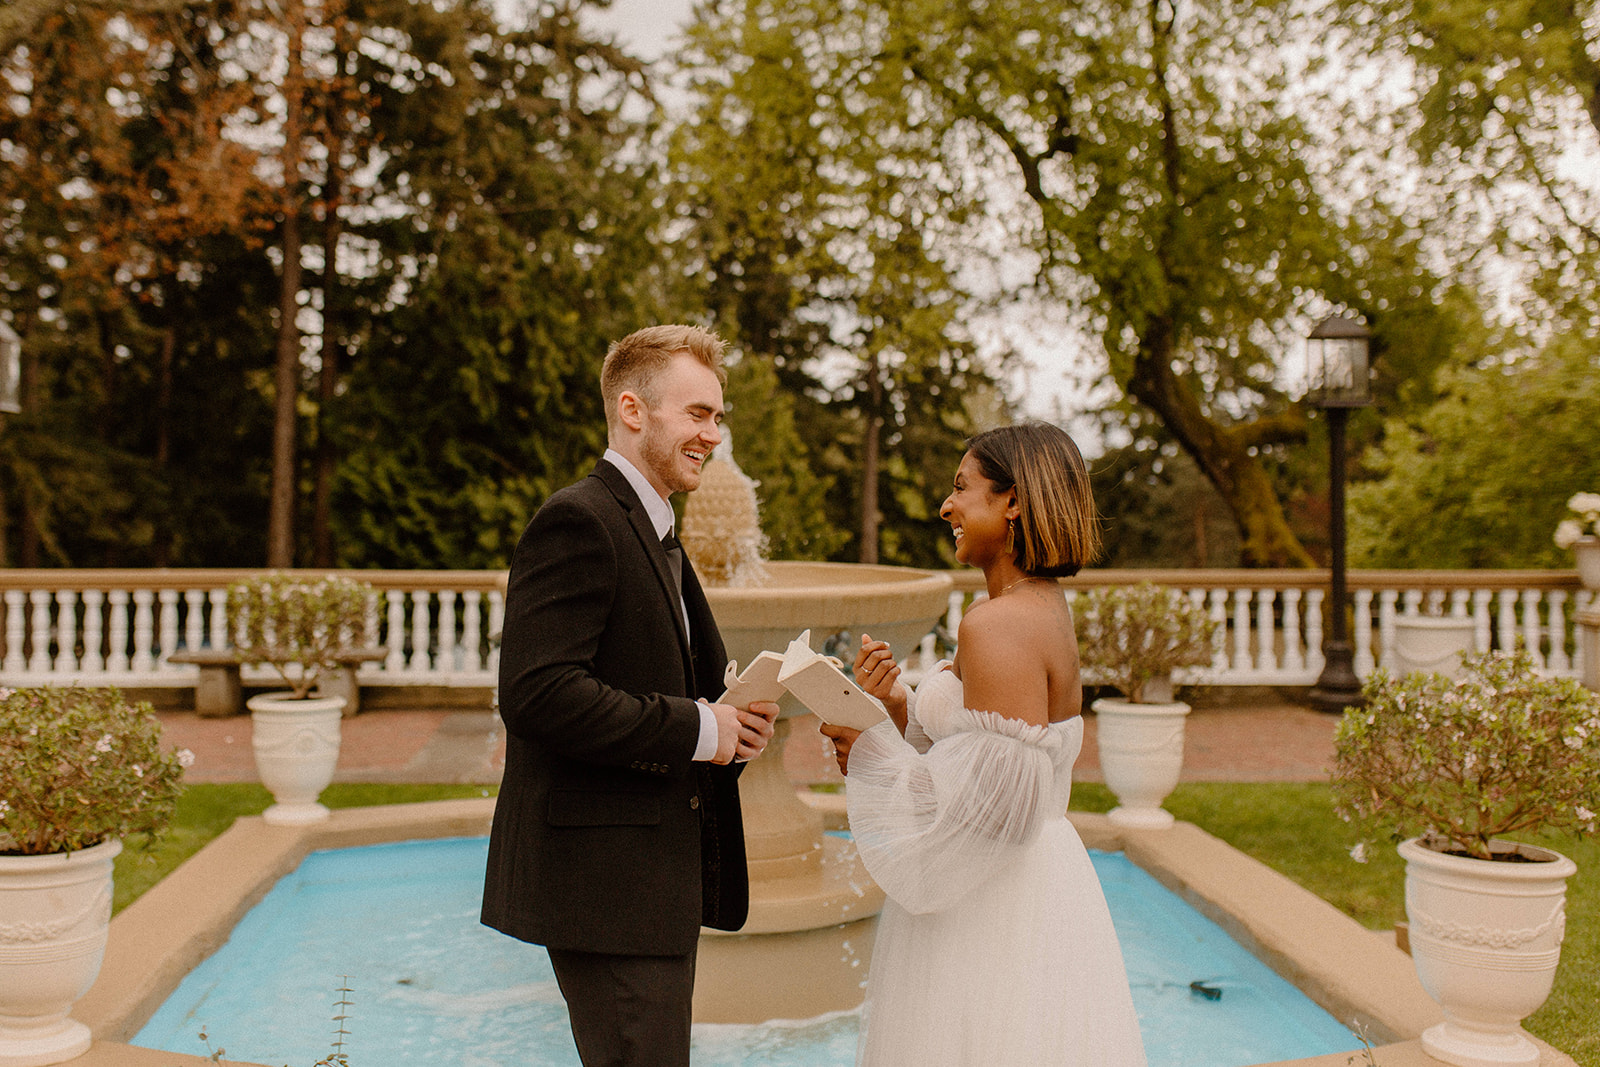 A Fun Intimate Wedding Day at Lairmont Manor With Elegant Wedding Decor